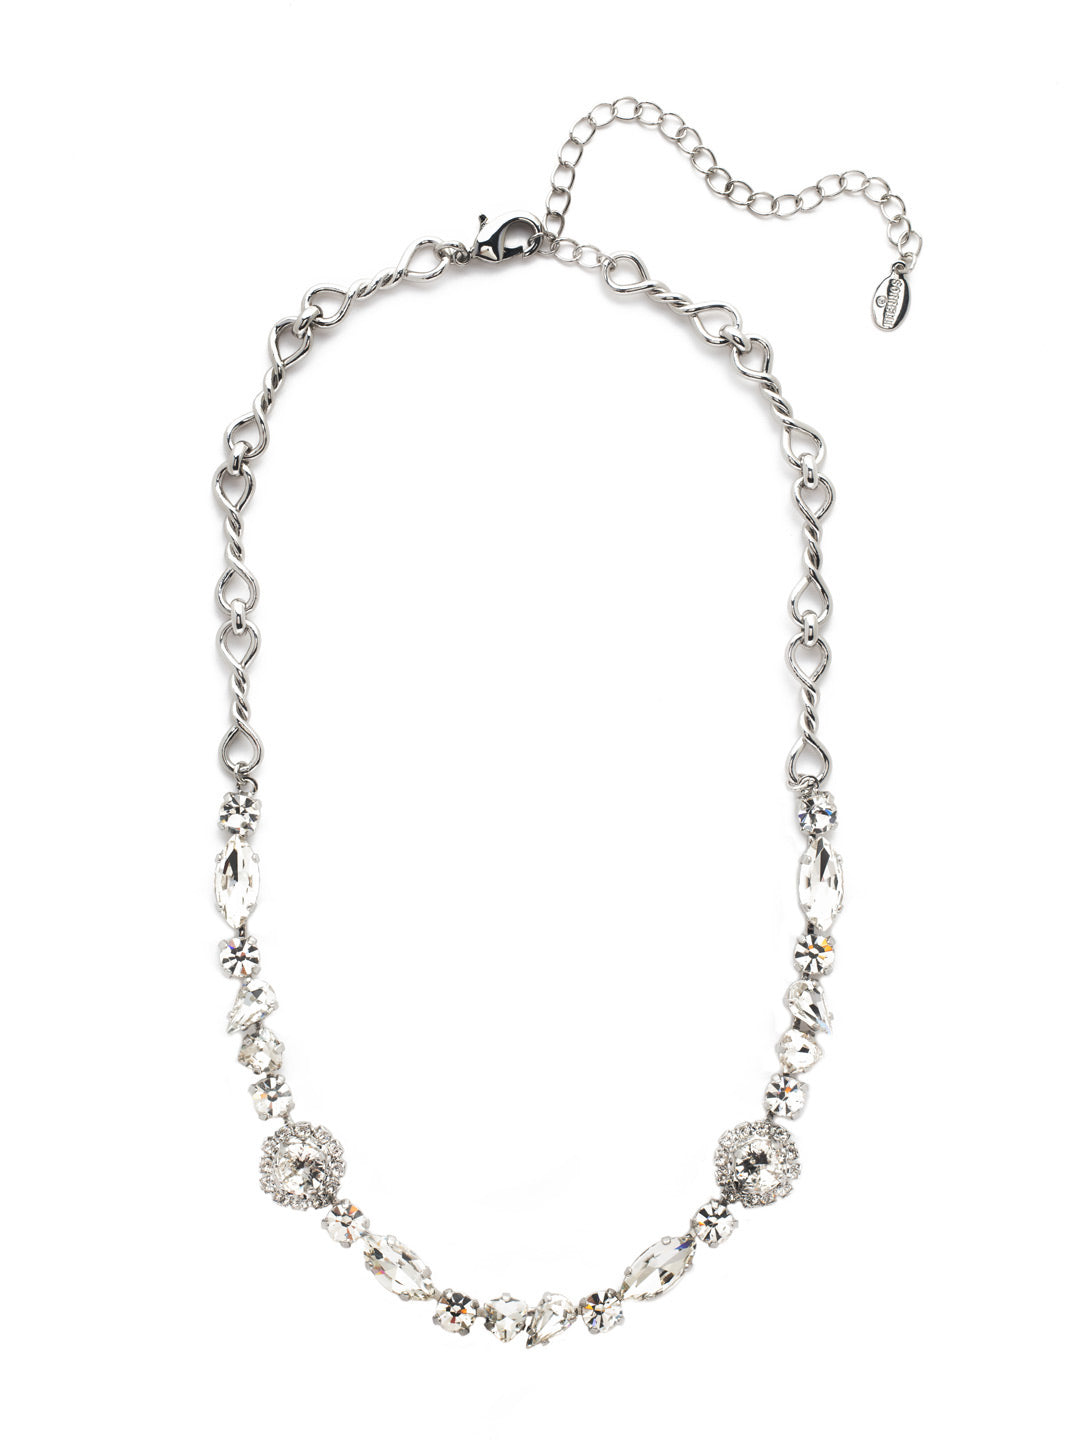 Nova Tennis Necklace - NES9PDCRY - <p>The Nova Tennis Necklace shines bright with hand-molded metalwork giving way to sparkling crystals galore in cushion, round, marquise and navette shapes. From Sorrelli's Crystal collection in our Palladium finish.</p>